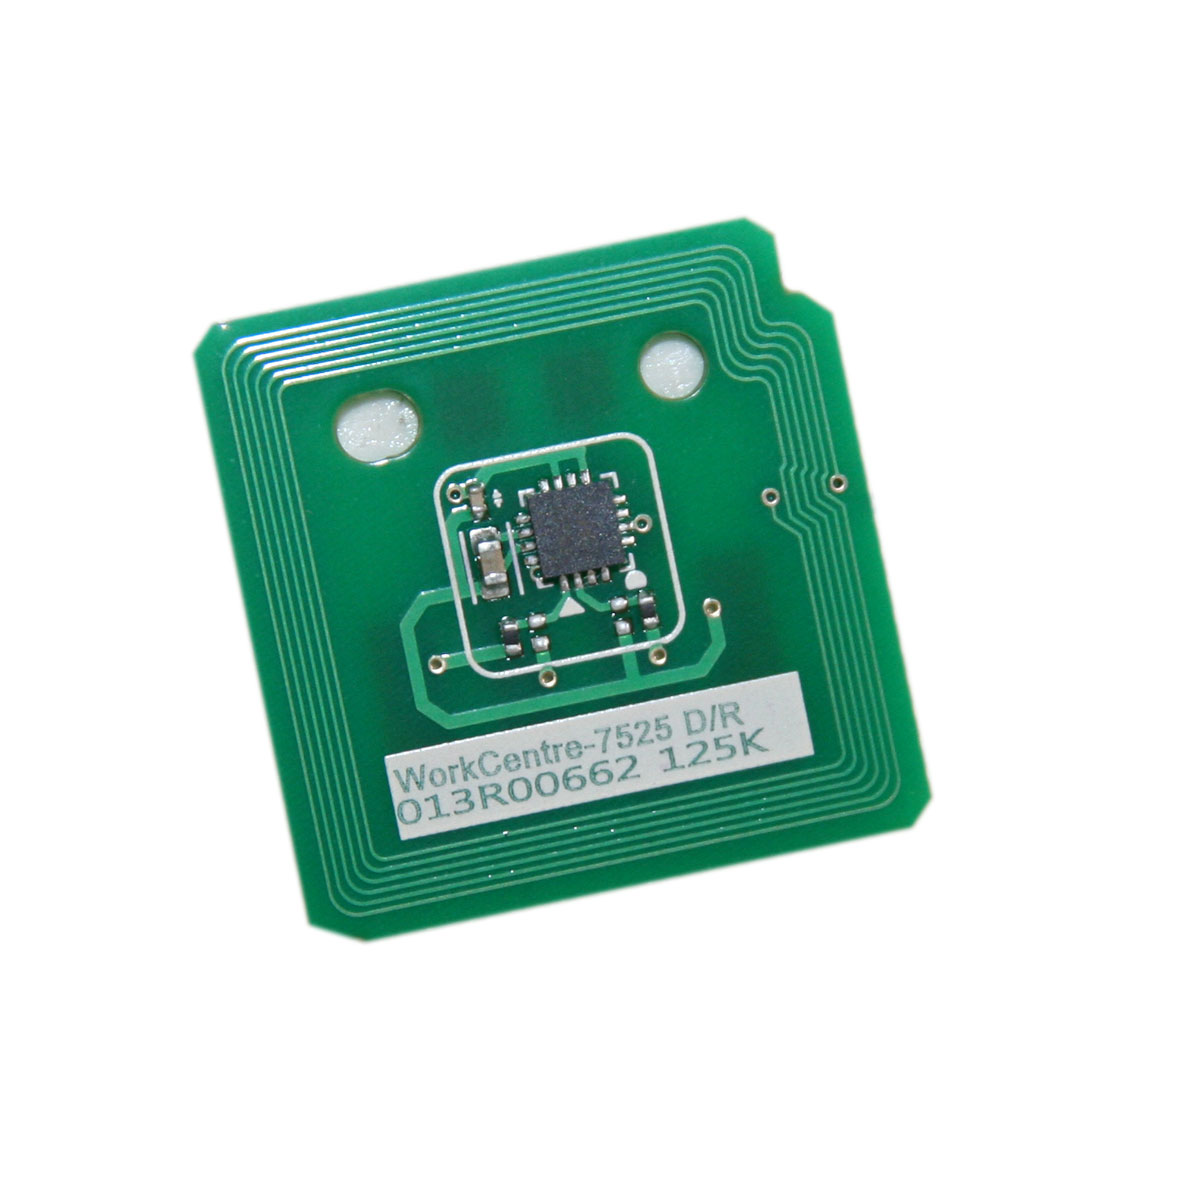 Counter chip for Drum Module Xerox WorkCentre 7855